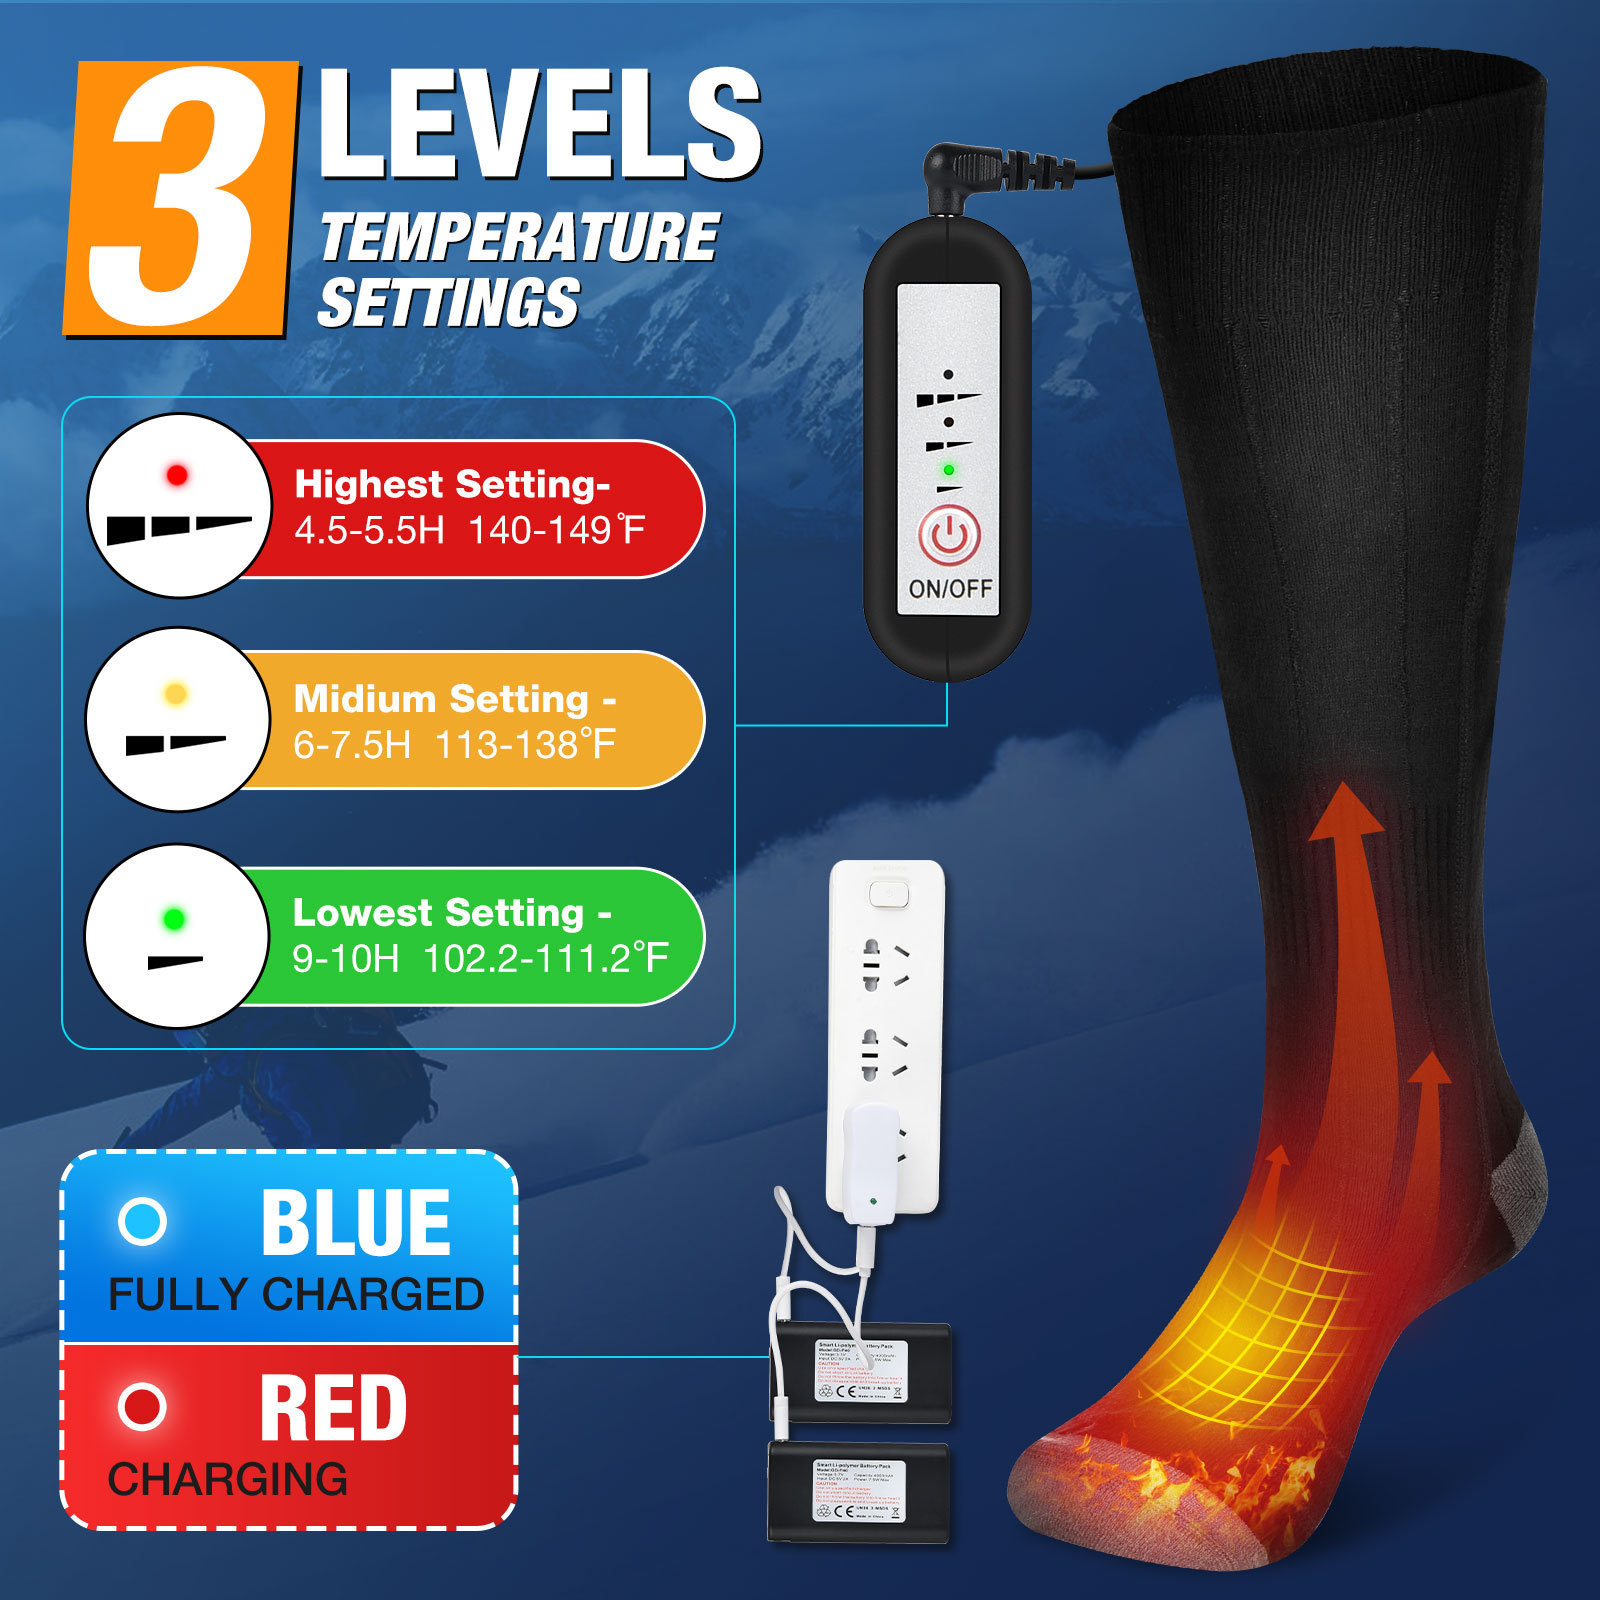 Washable Electric Thermal Warming Socks For Hunting Winter Skiing Outdoors MTECF002